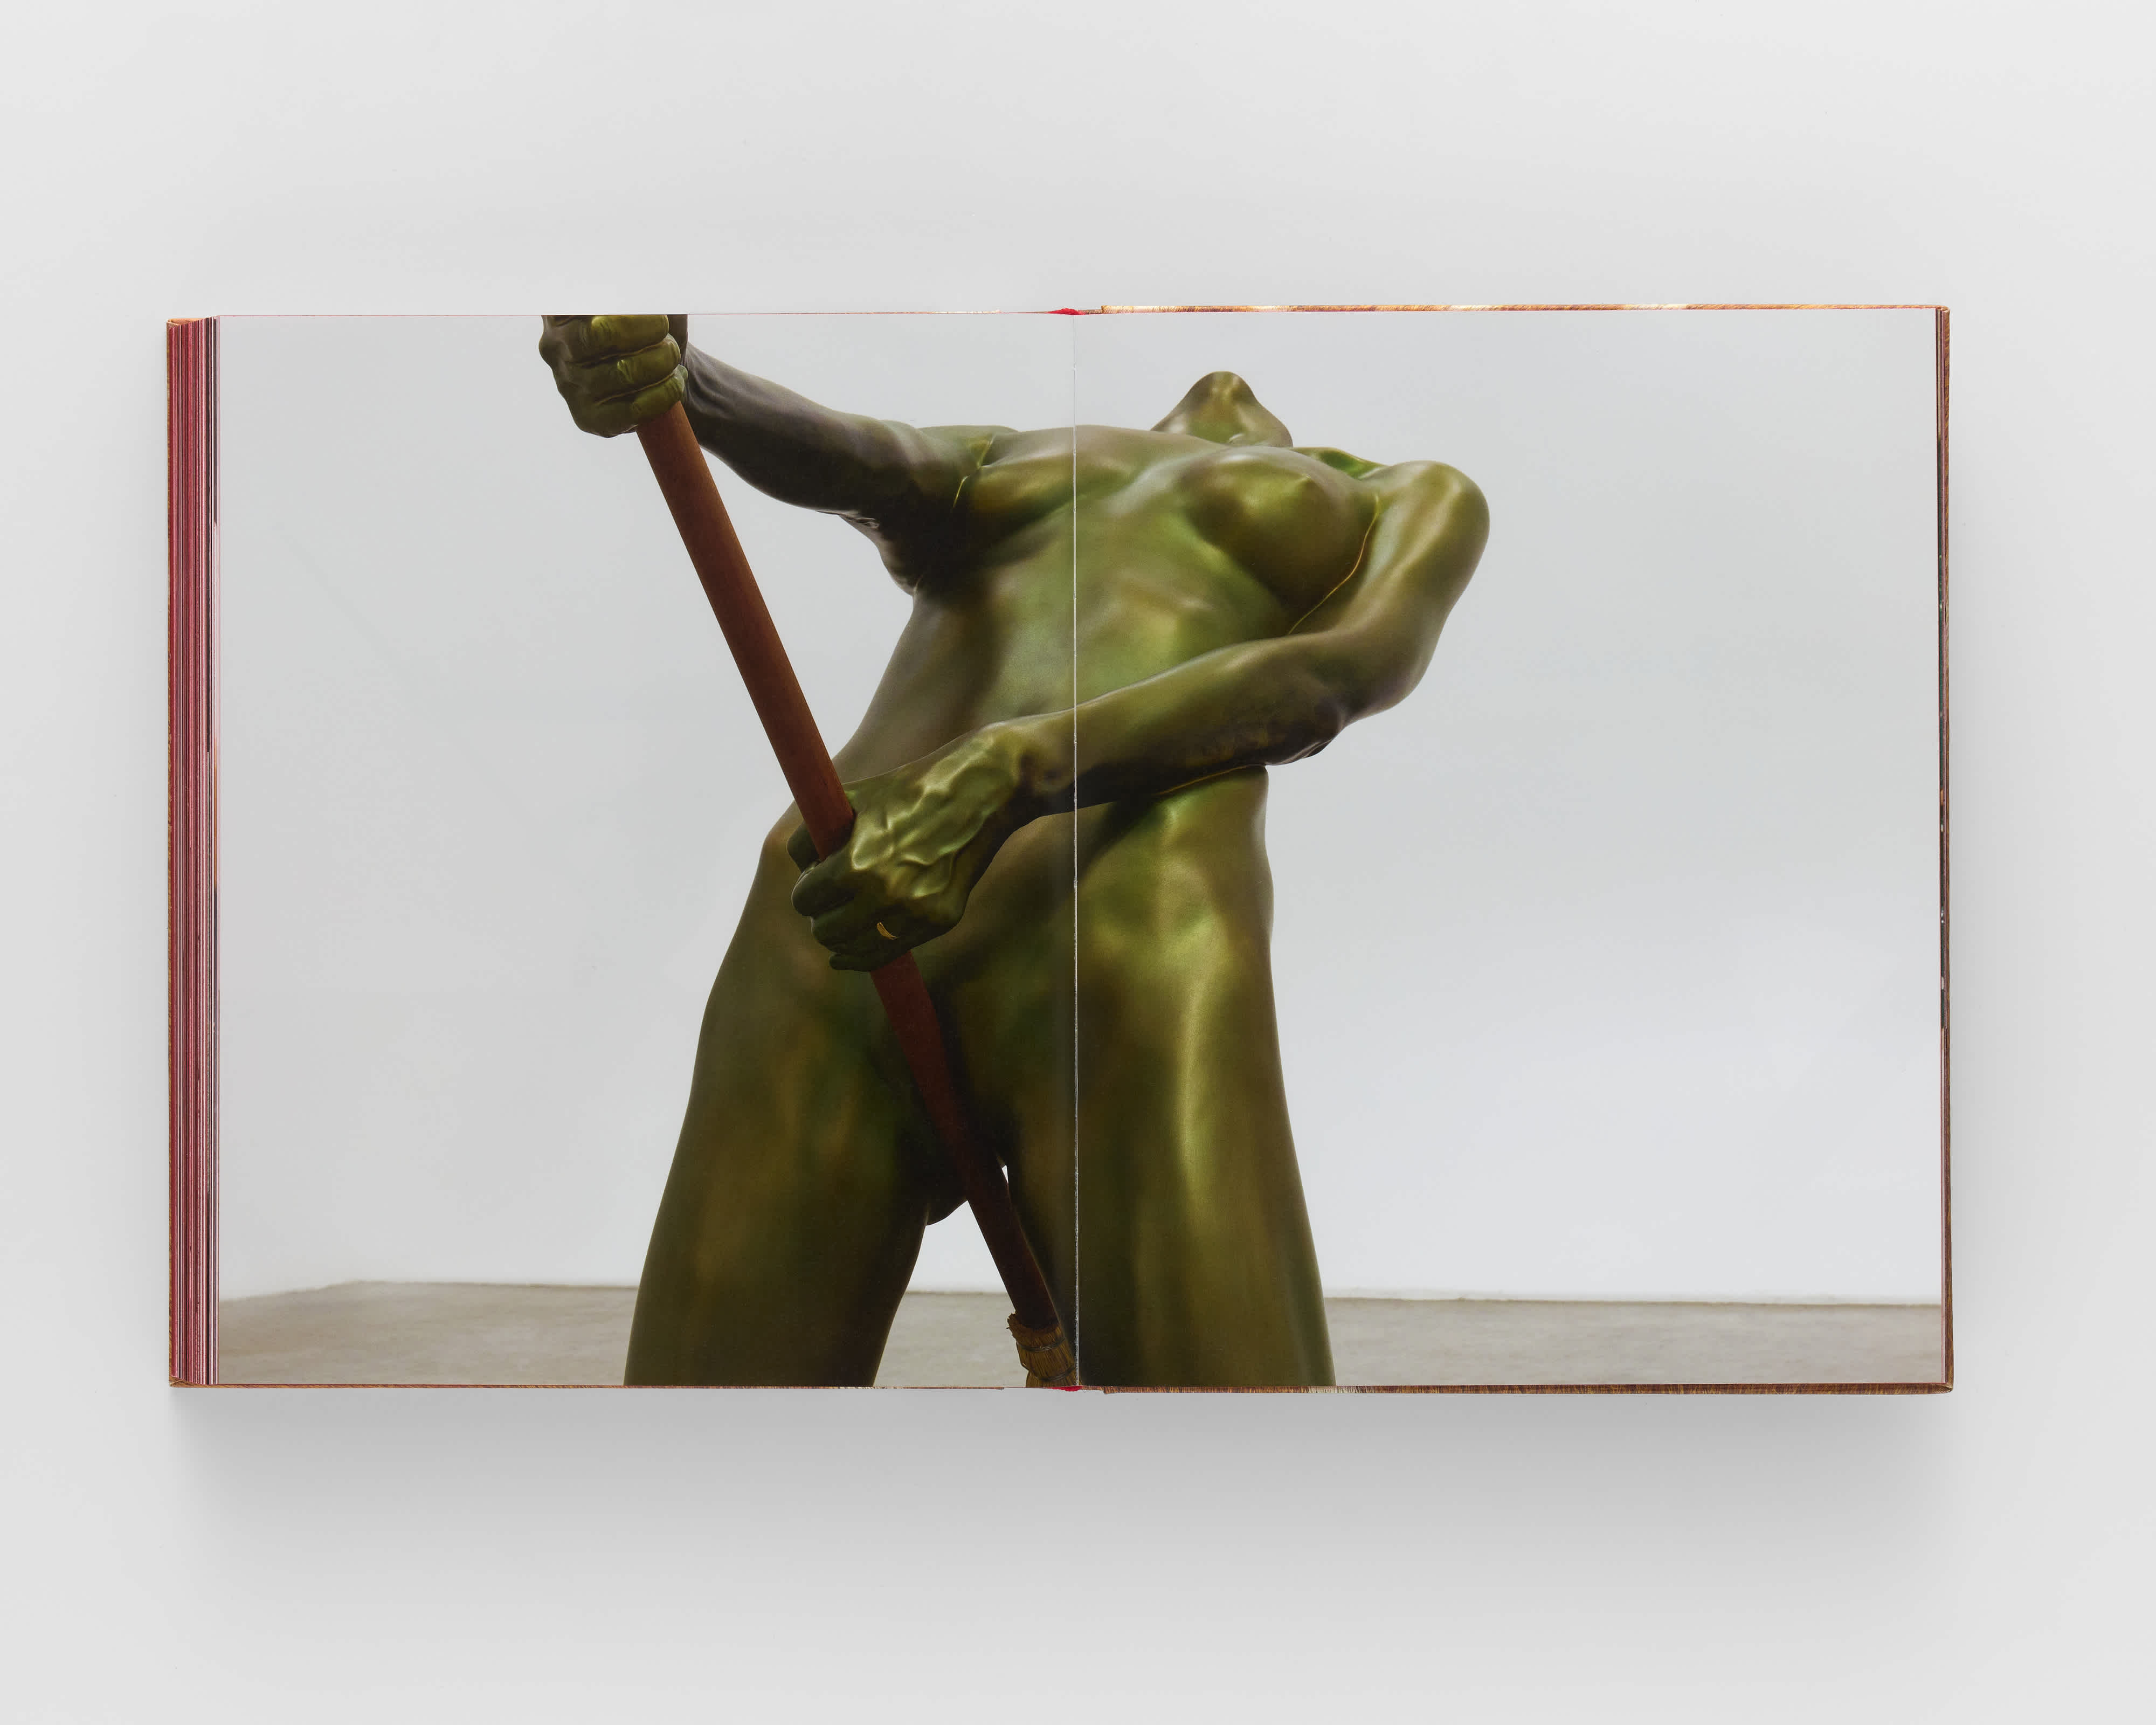 An open book on a grey background. A full-bleed, centerfold image of a sculpture takes up both pages. The sculpture is a greenish-metal casting of the human form riding a broom.